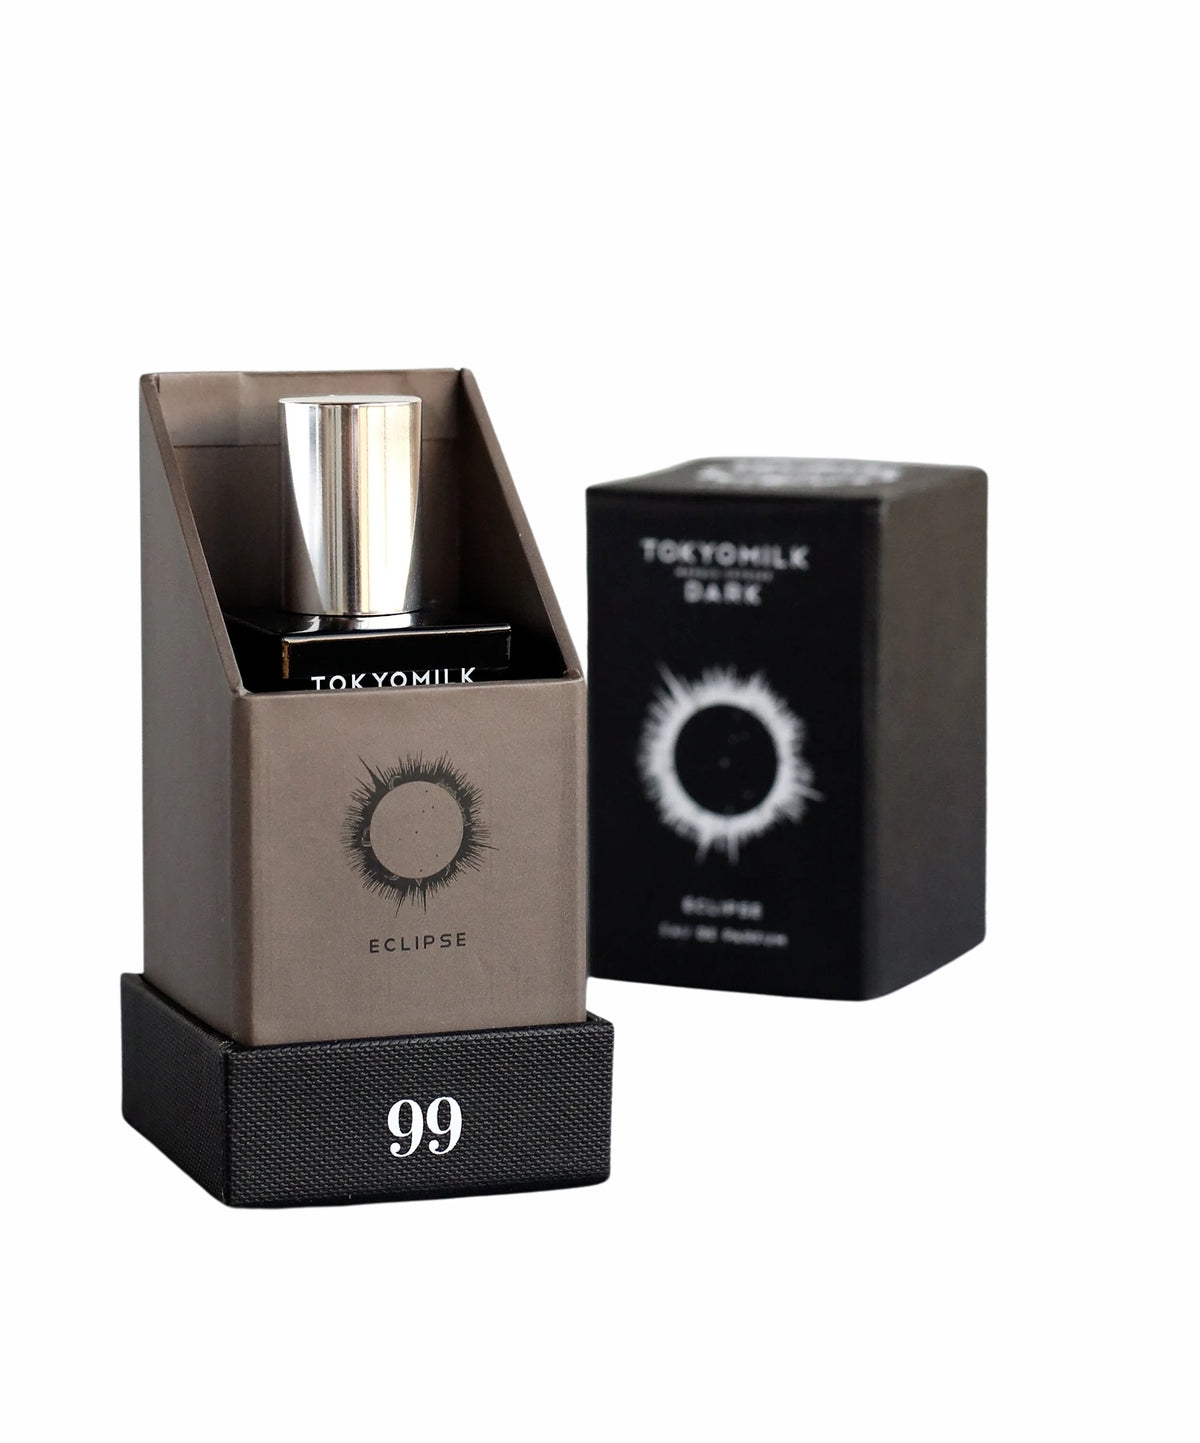 A bottle of "Margot Elena TokyoMilk Dark Eclipse No. 99 Eau de Parfum" displayed beside its packaging box, both set against a plain white background. The box features a graphic of an eye with a star.